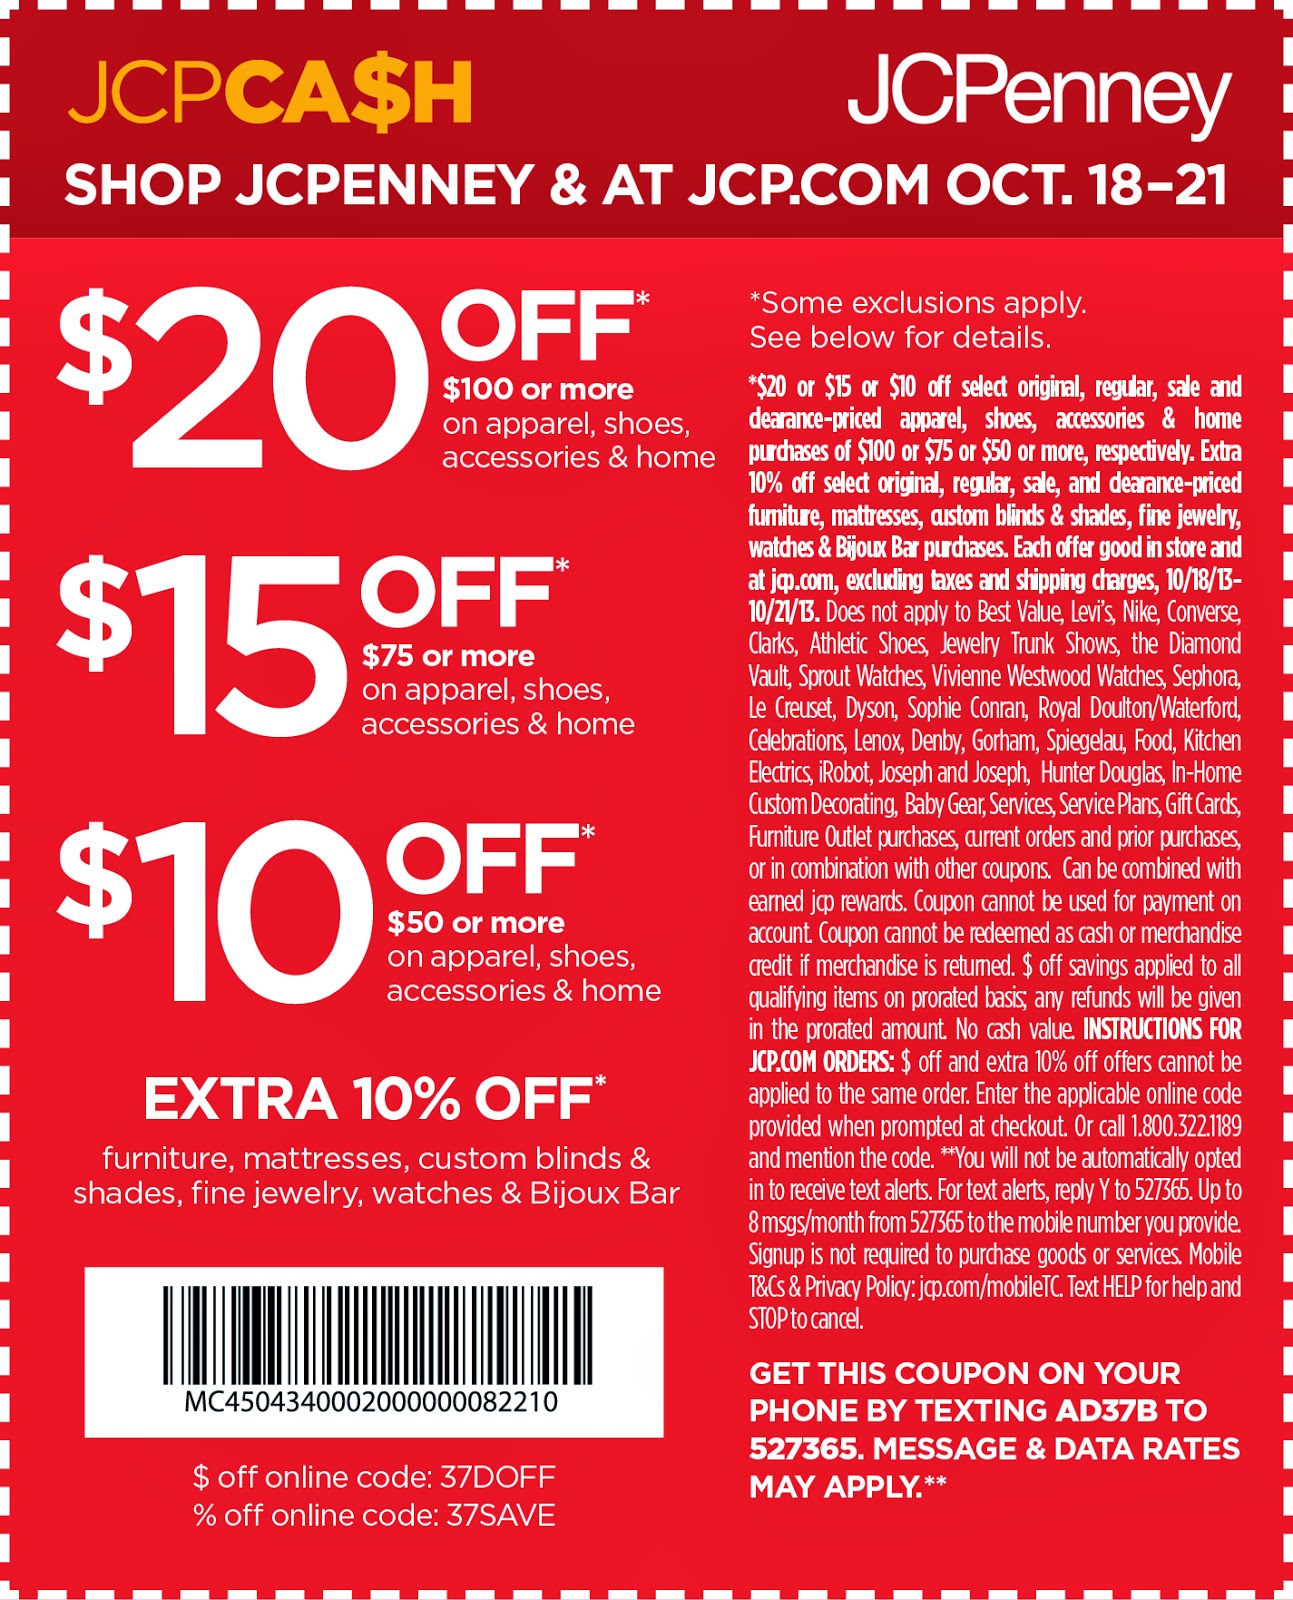 Printable Coupons: JcPenney Coupons